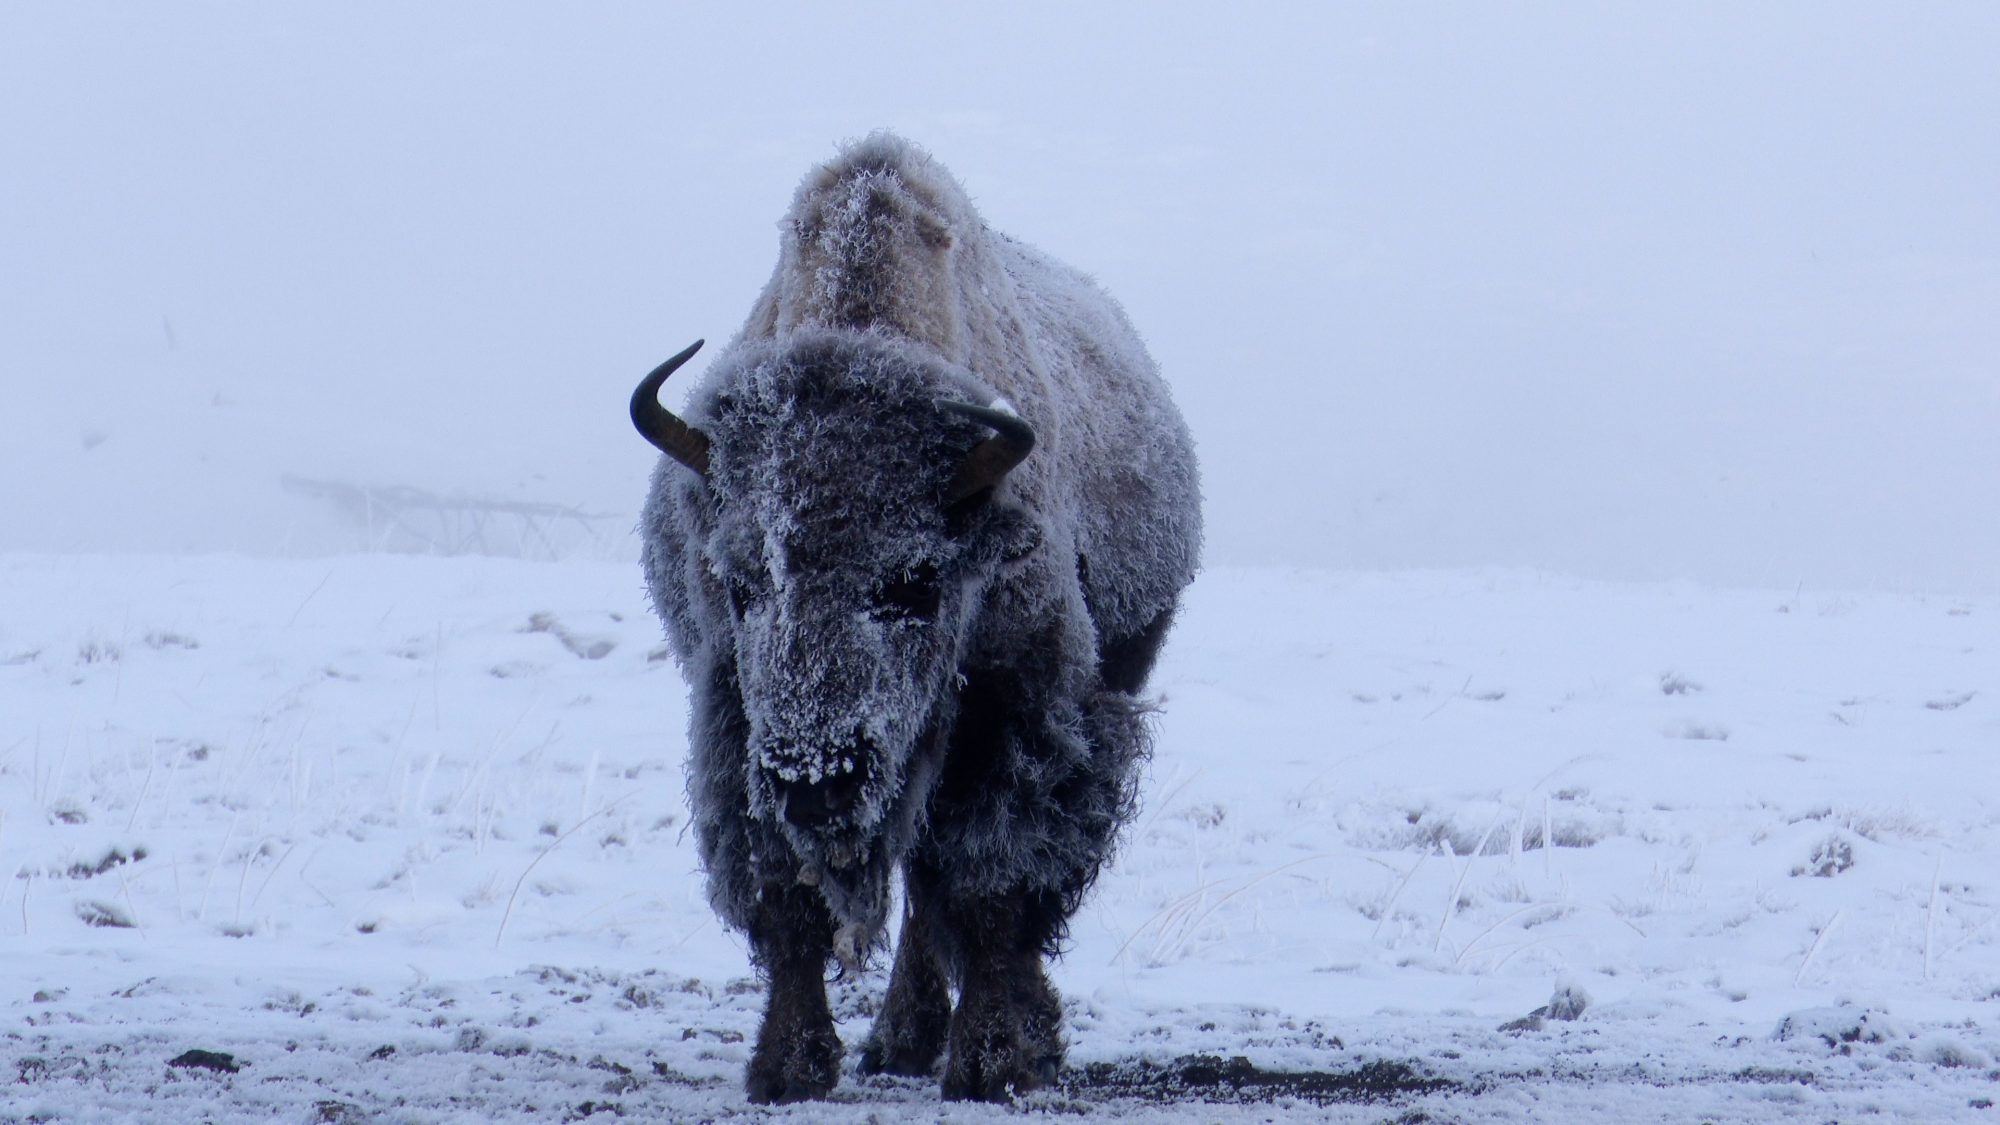 Icy Bison of Yellowstone, 2019